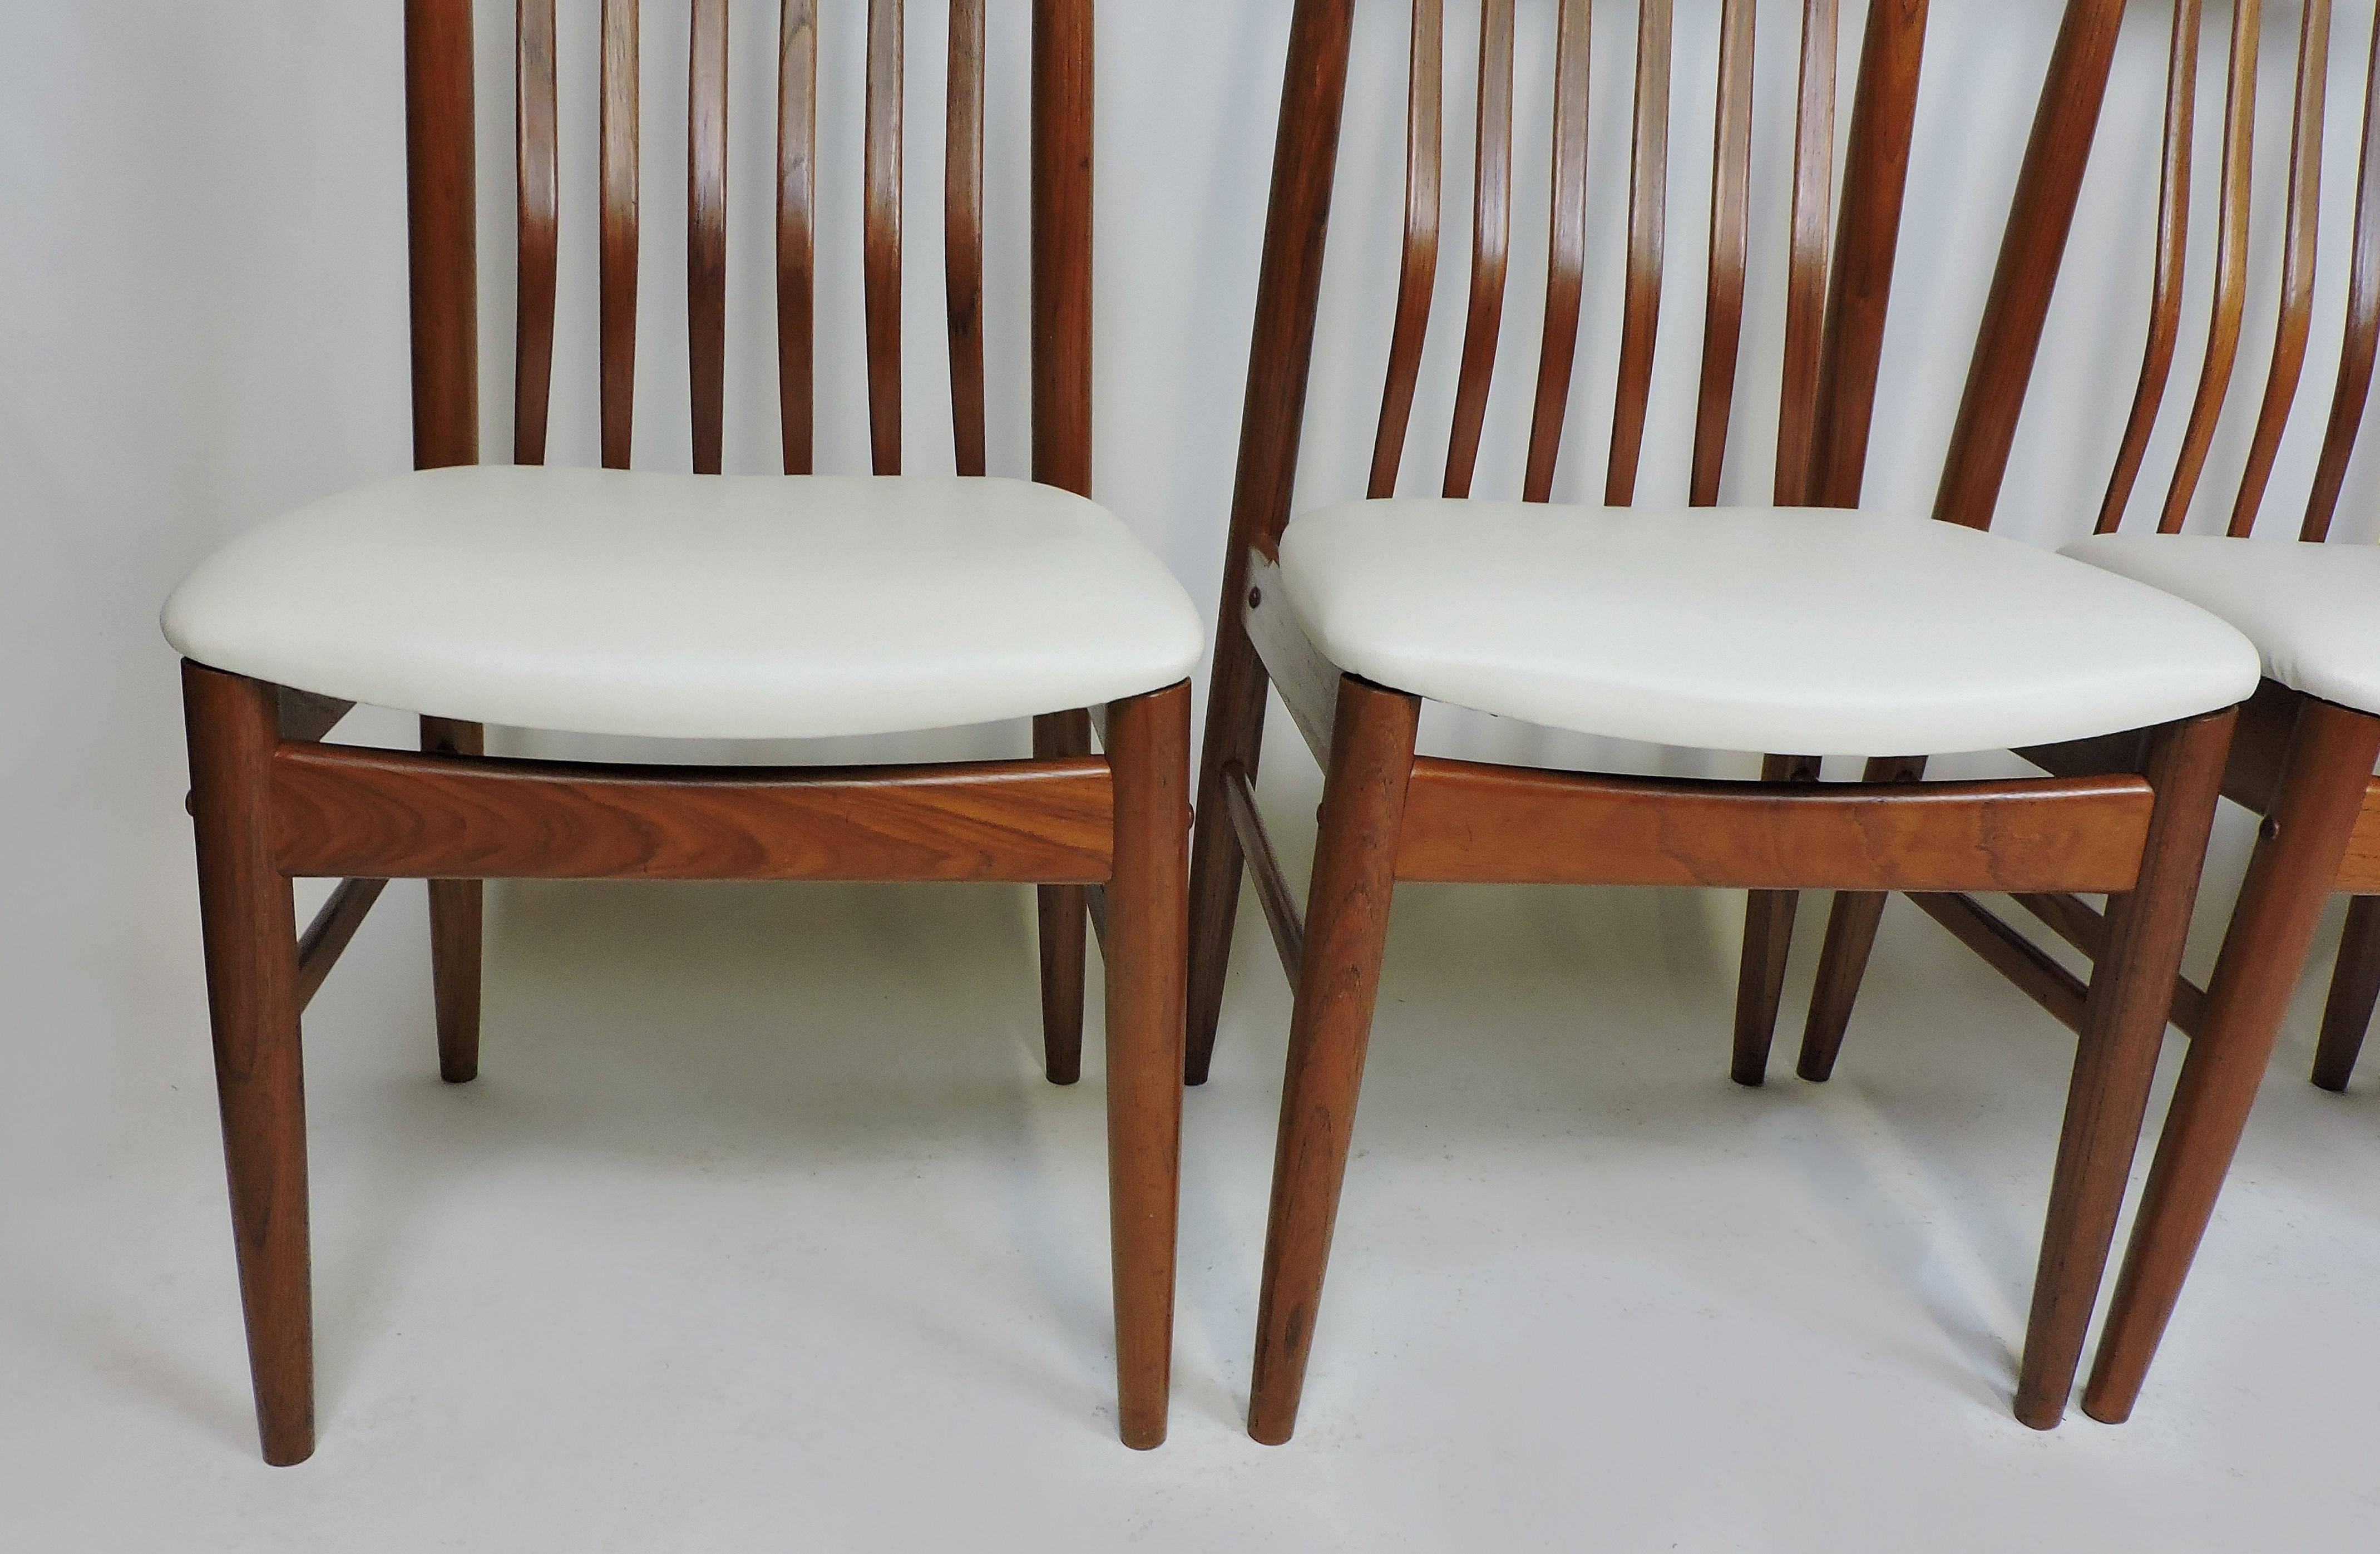 Upholstery Four Midcentury Danish Modern Teak Benny Linden Dining Chairs